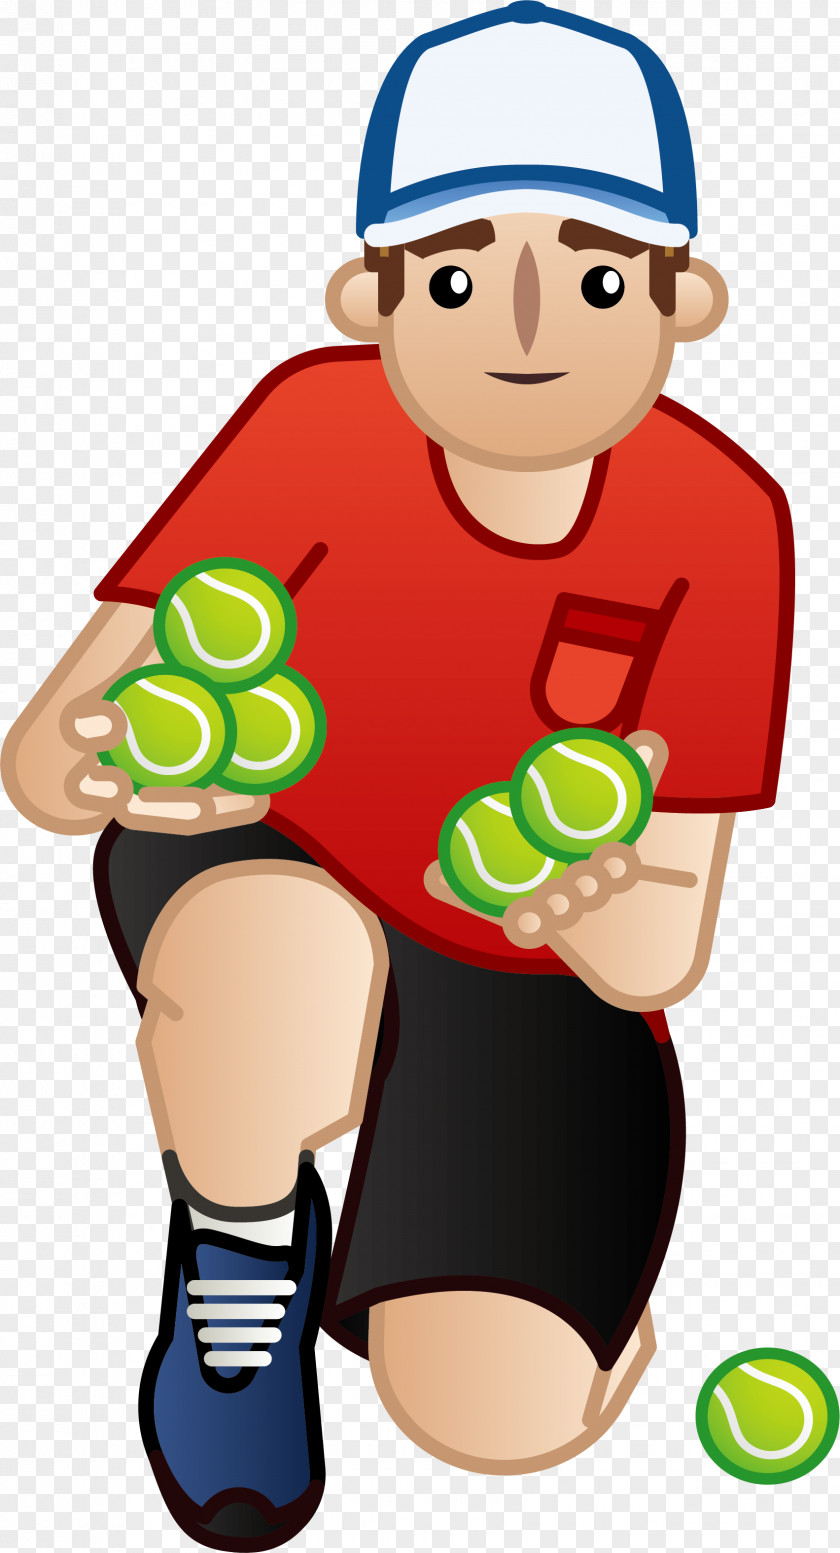 Tennis Court Picking Up Players The US Open (Tennis) Centre Clip Art PNG